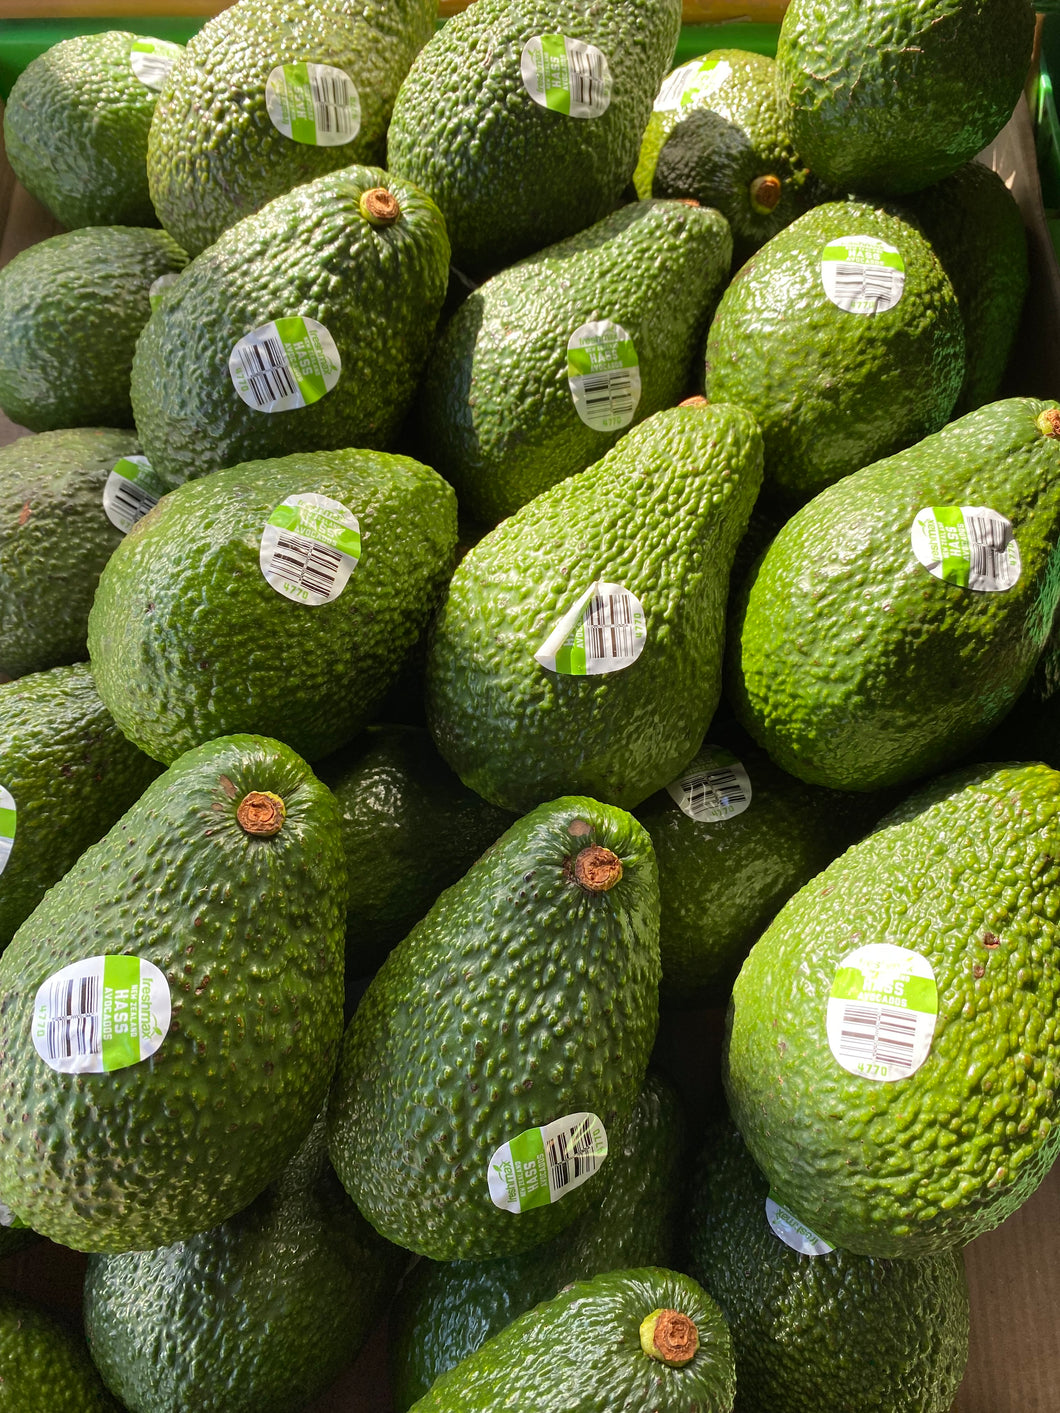 NZ Large Hass Avocados